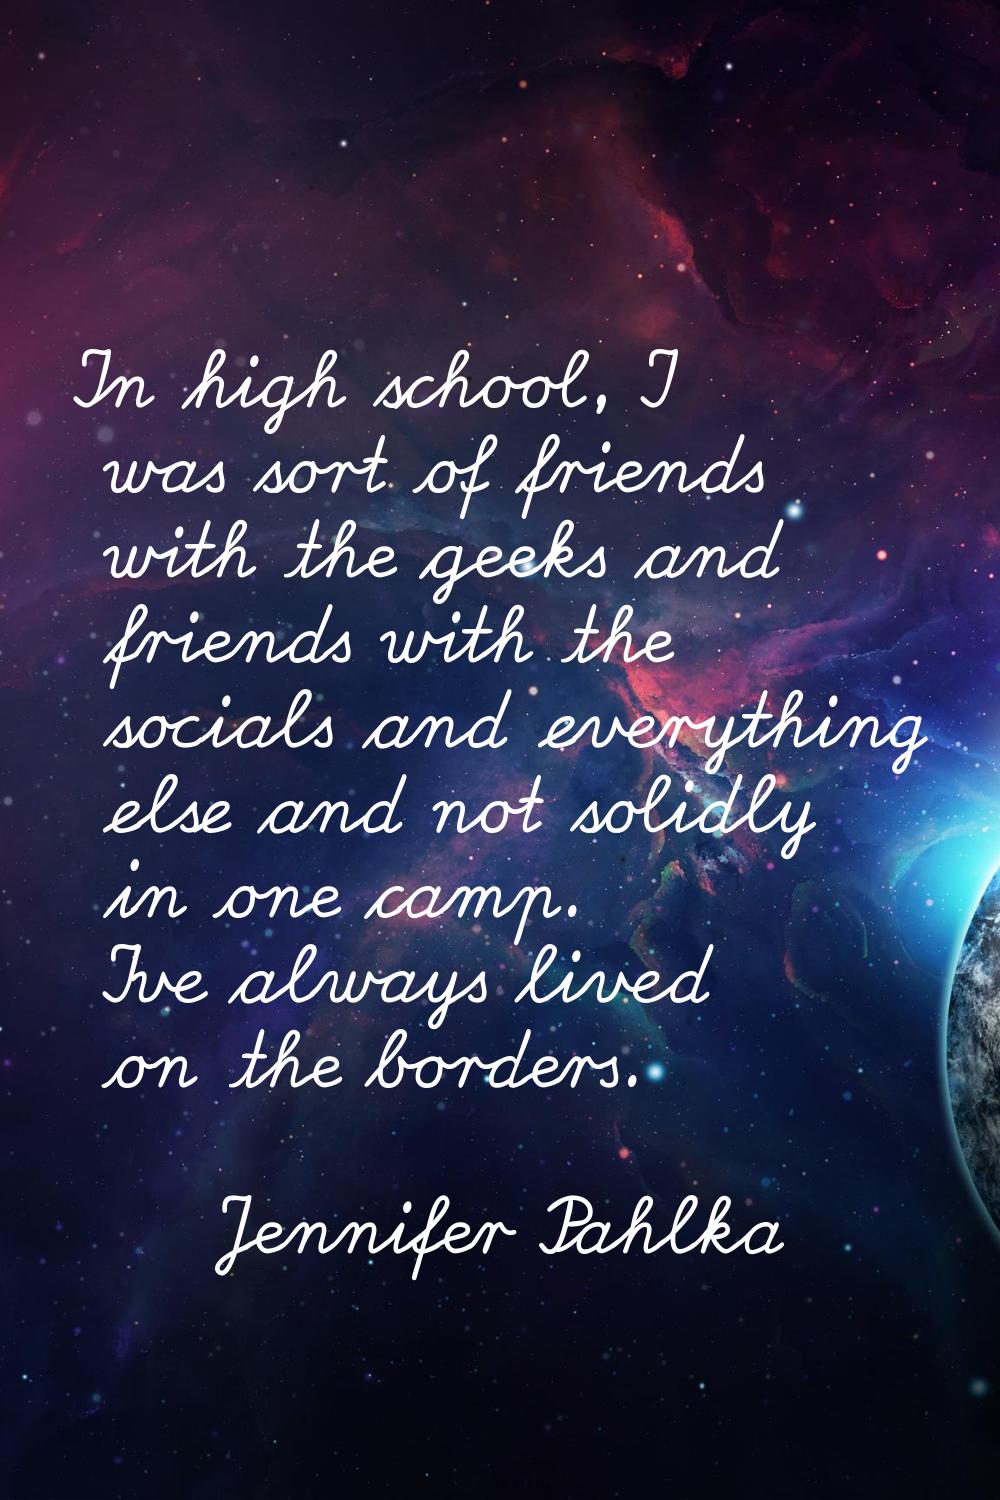 In high school, I was sort of friends with the geeks and friends with the socials and everything el